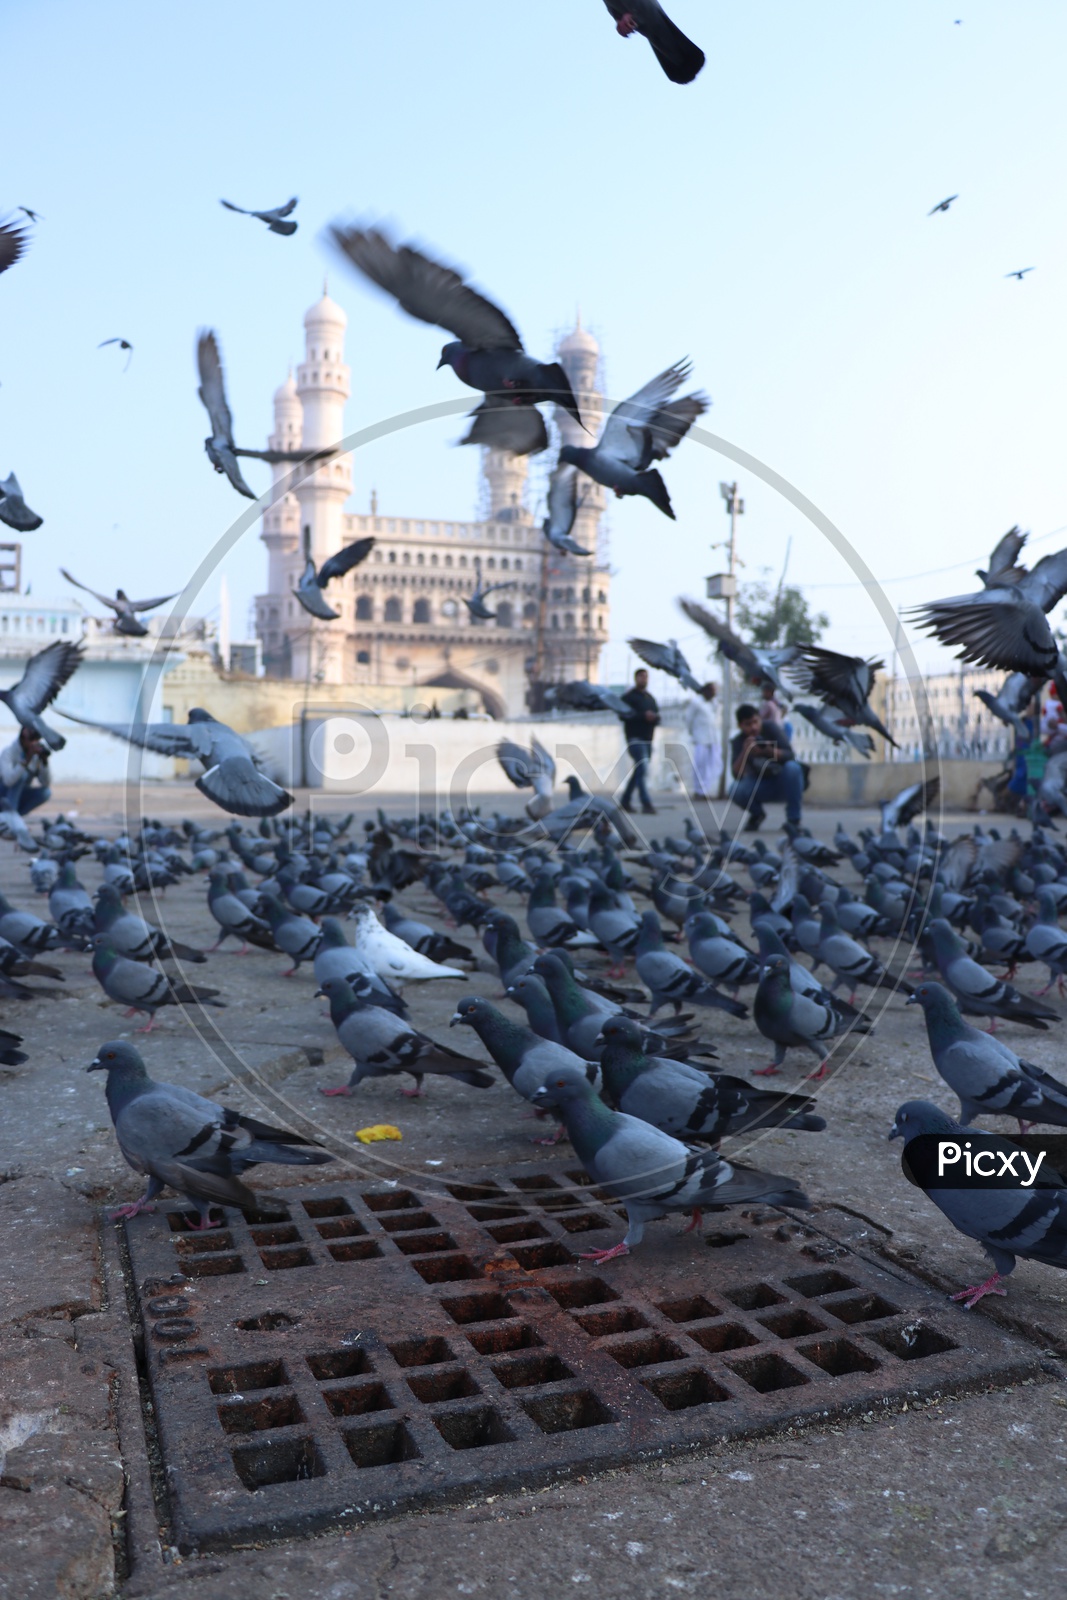 Composition Of Charminar With Pigeons  in  Mecca Masjidh